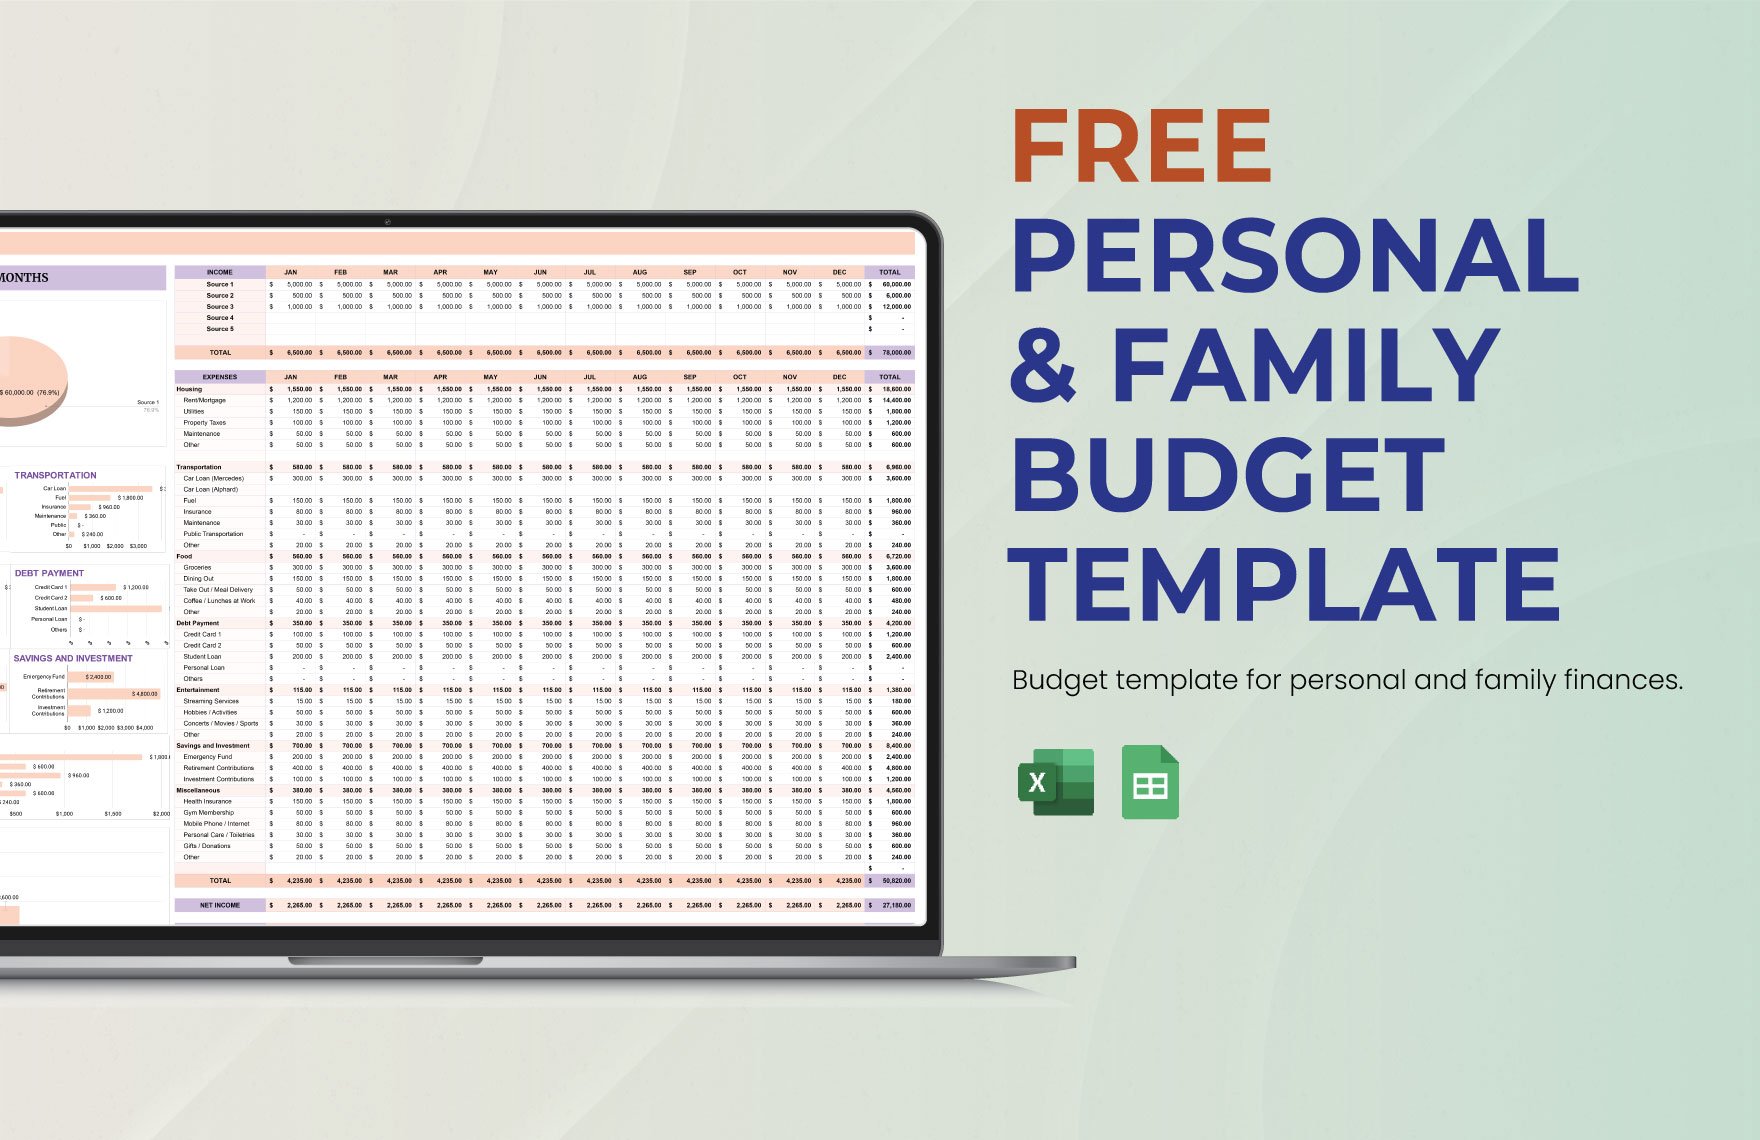 Free Personal & Family Budget Template